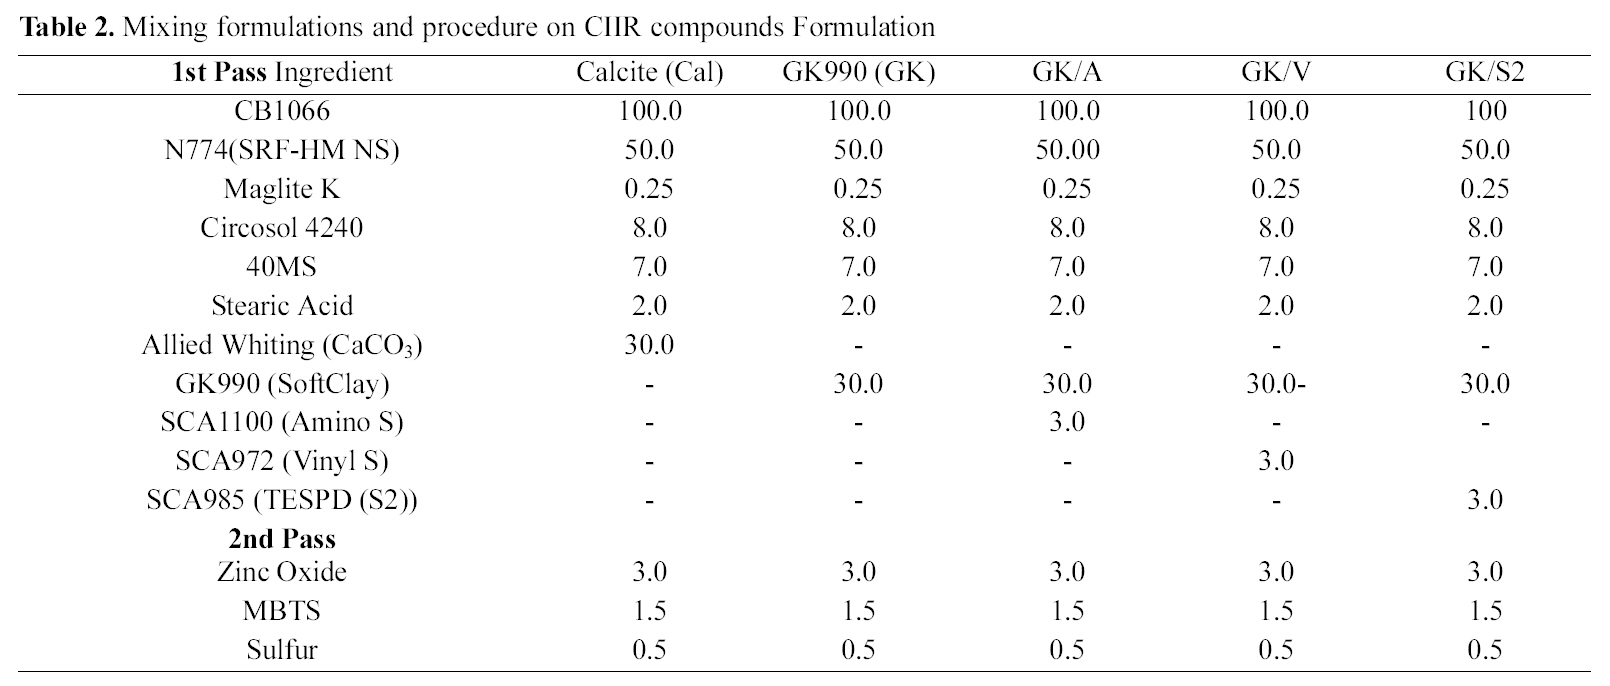 Mixing formulations and procedure on CIIR compounds Formulation